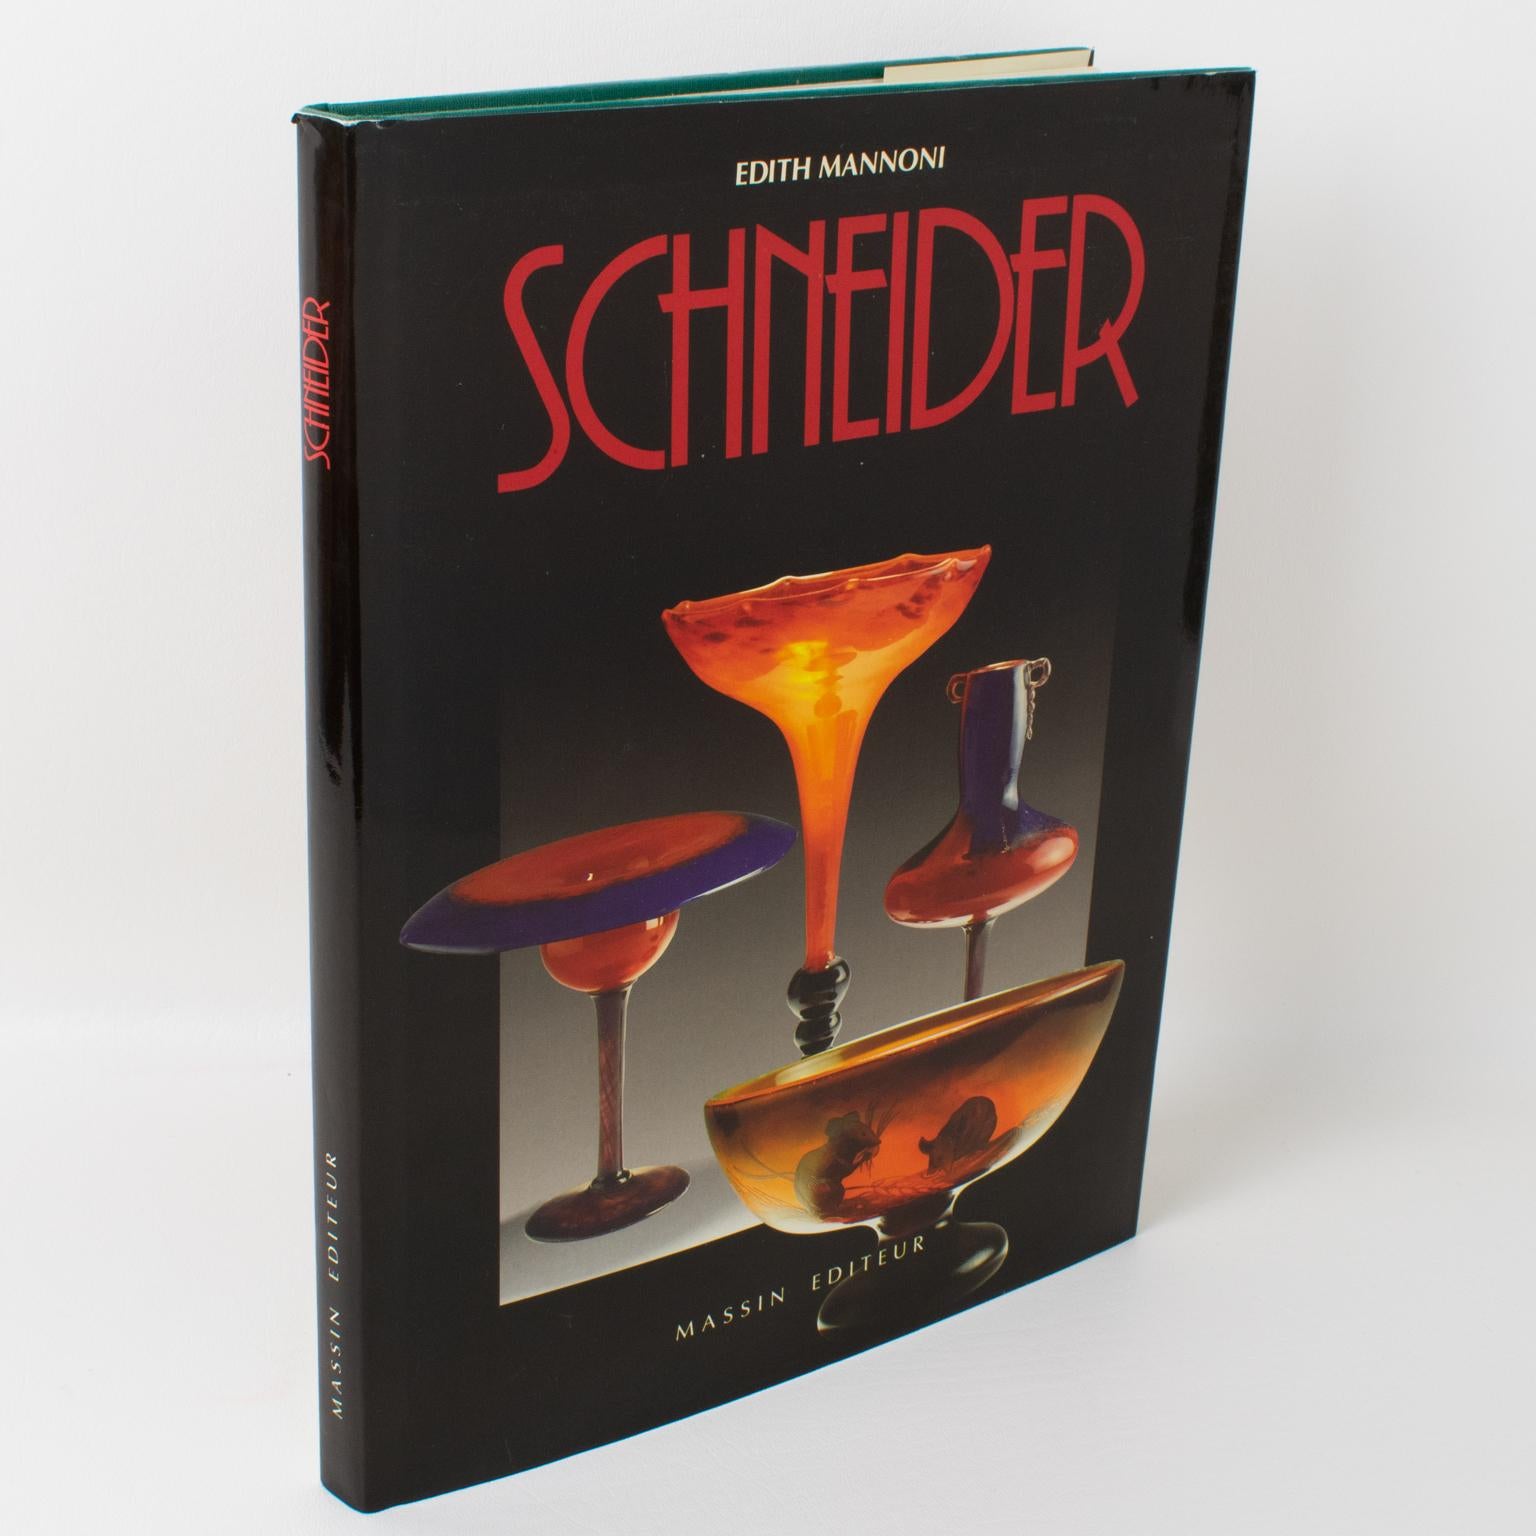 Schneider, French and English Book by Edith Mannoni, 1992.
This book traces the factory's history and presents a hundred reproductions of original plates and sketches from the 1920s. Covering the Art Nouveau and Art Deco periods, this book relates